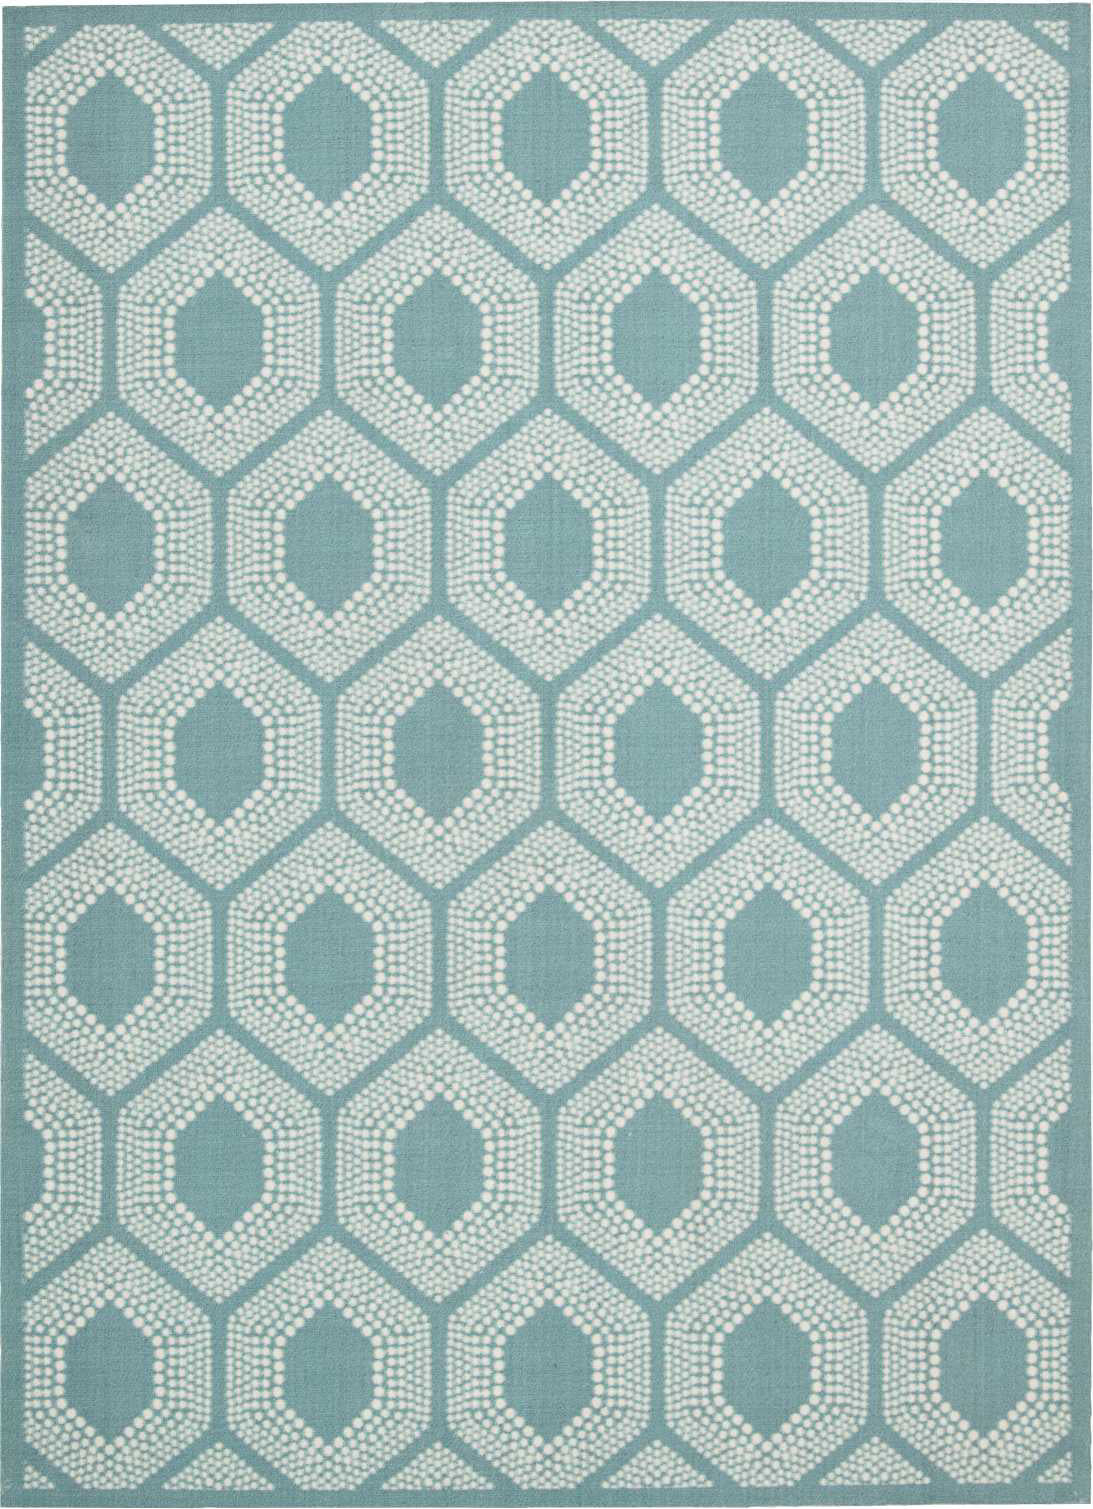 Nourison Wav01/Sun and Shade SND26 Surf Area Rug by Waverly